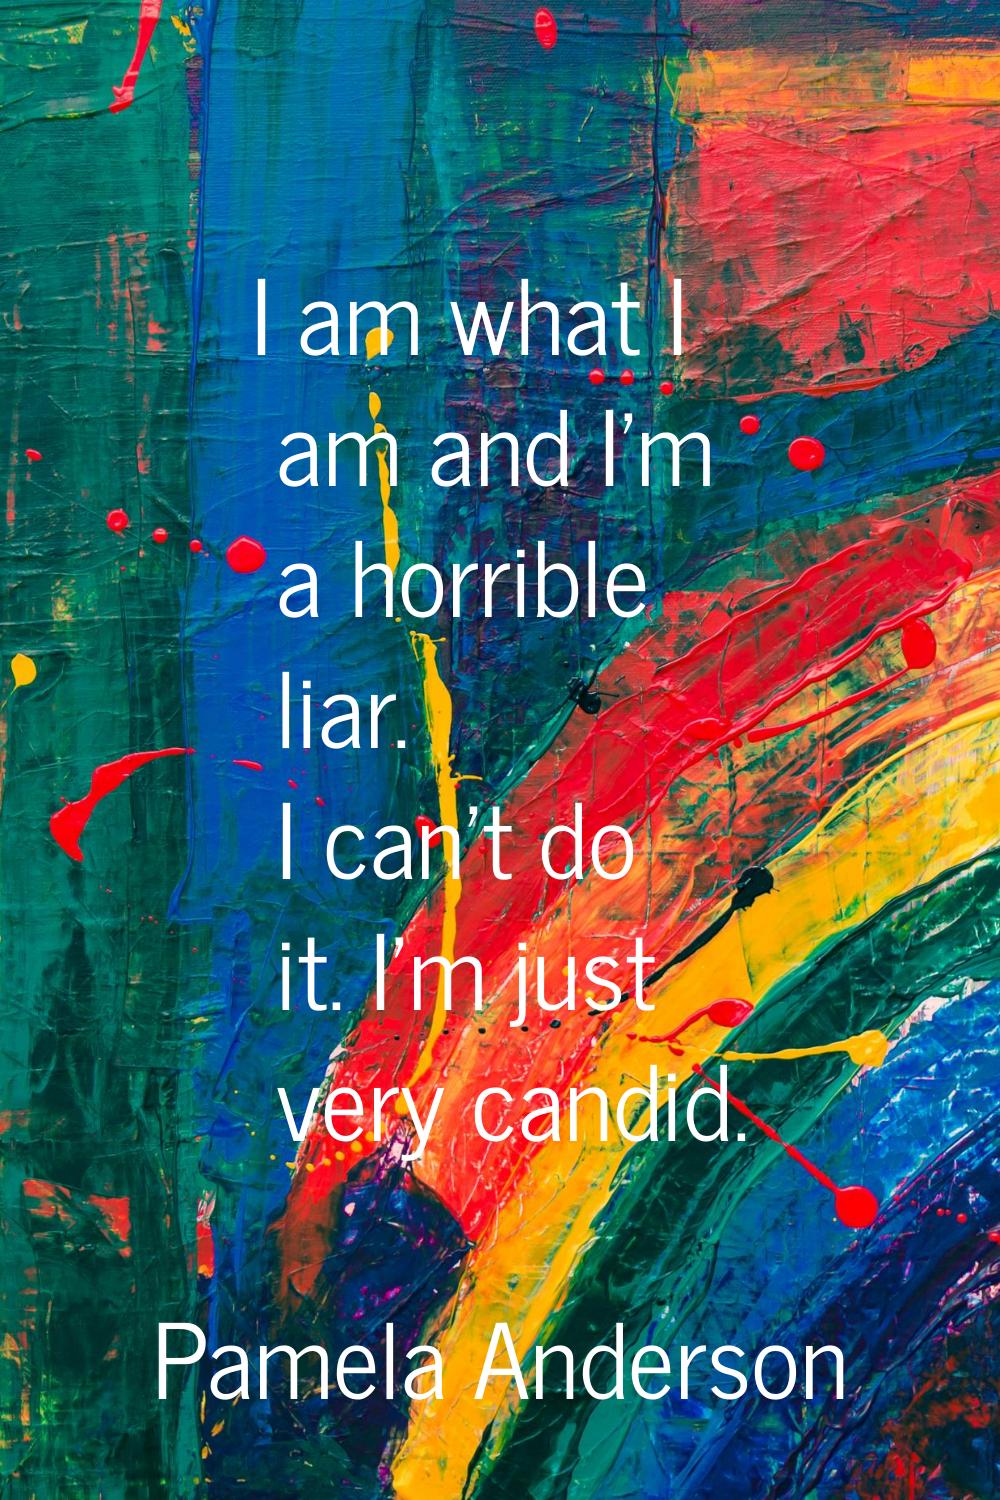 I am what I am and I'm a horrible liar. I can't do it. I'm just very candid.